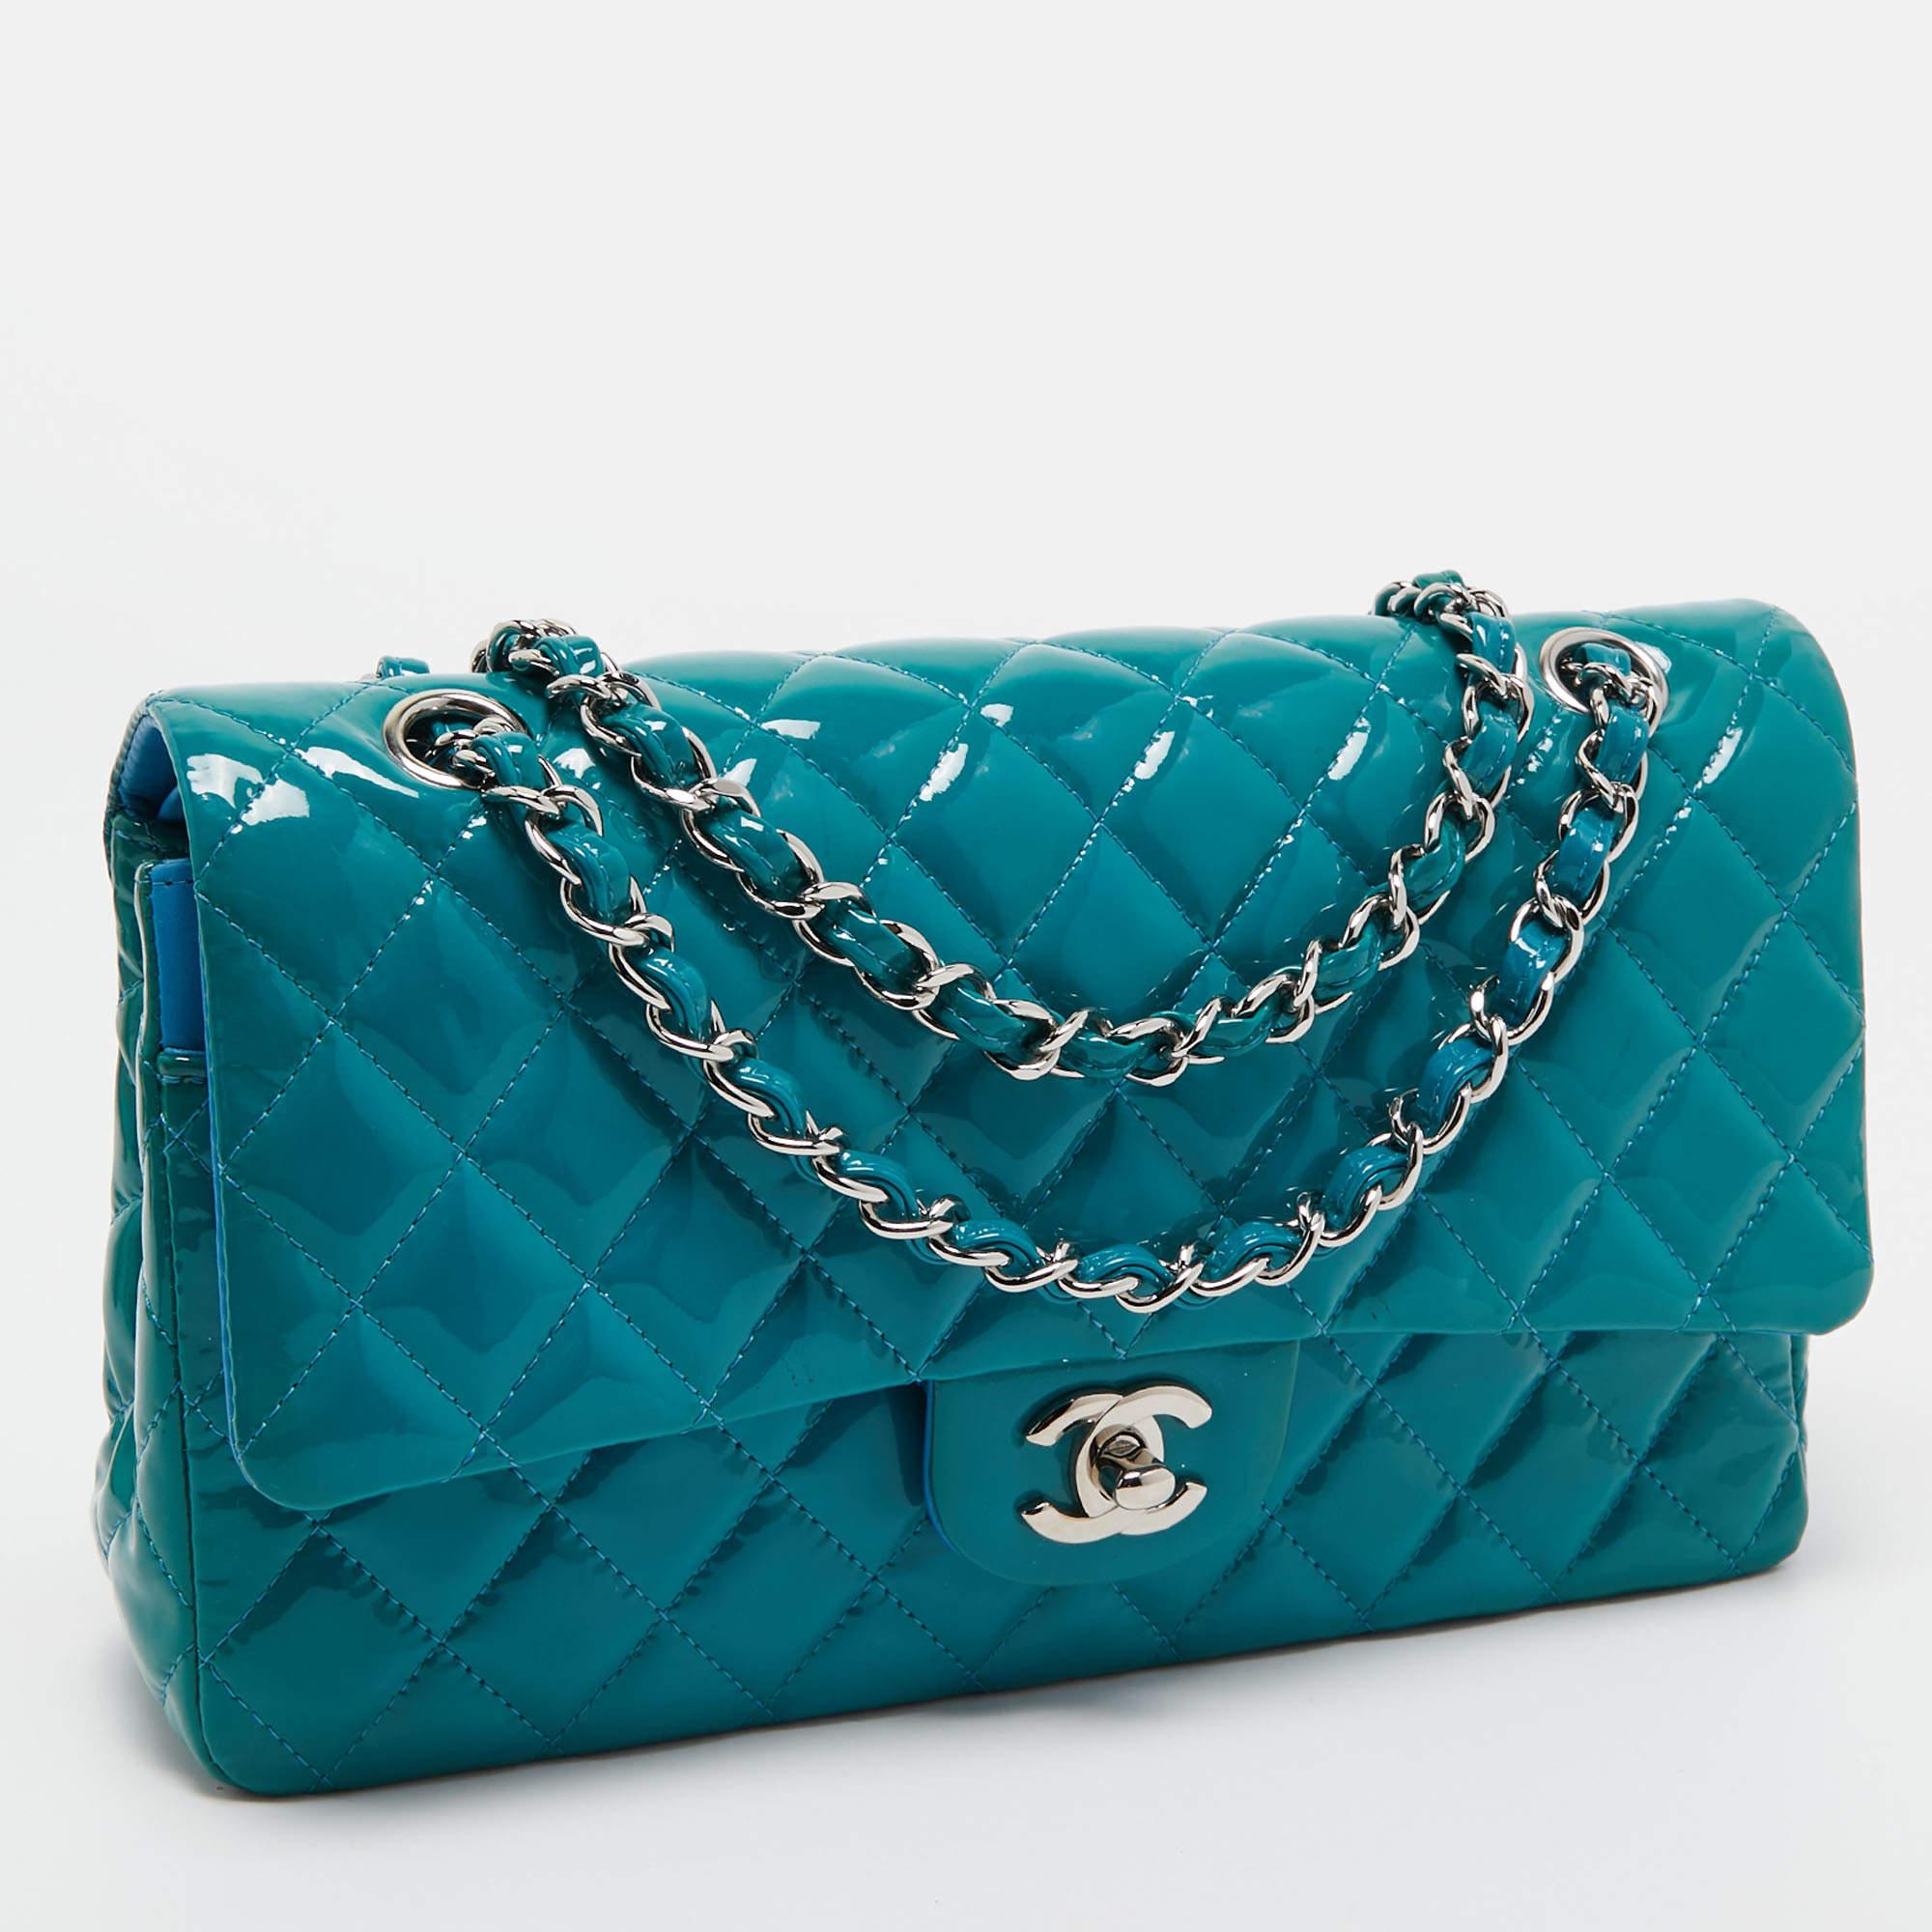 Chanel Teal Blue Quilted Patent Leather Medium Classic Double Flap Bag In Fair Condition For Sale In Dubai, Al Qouz 2